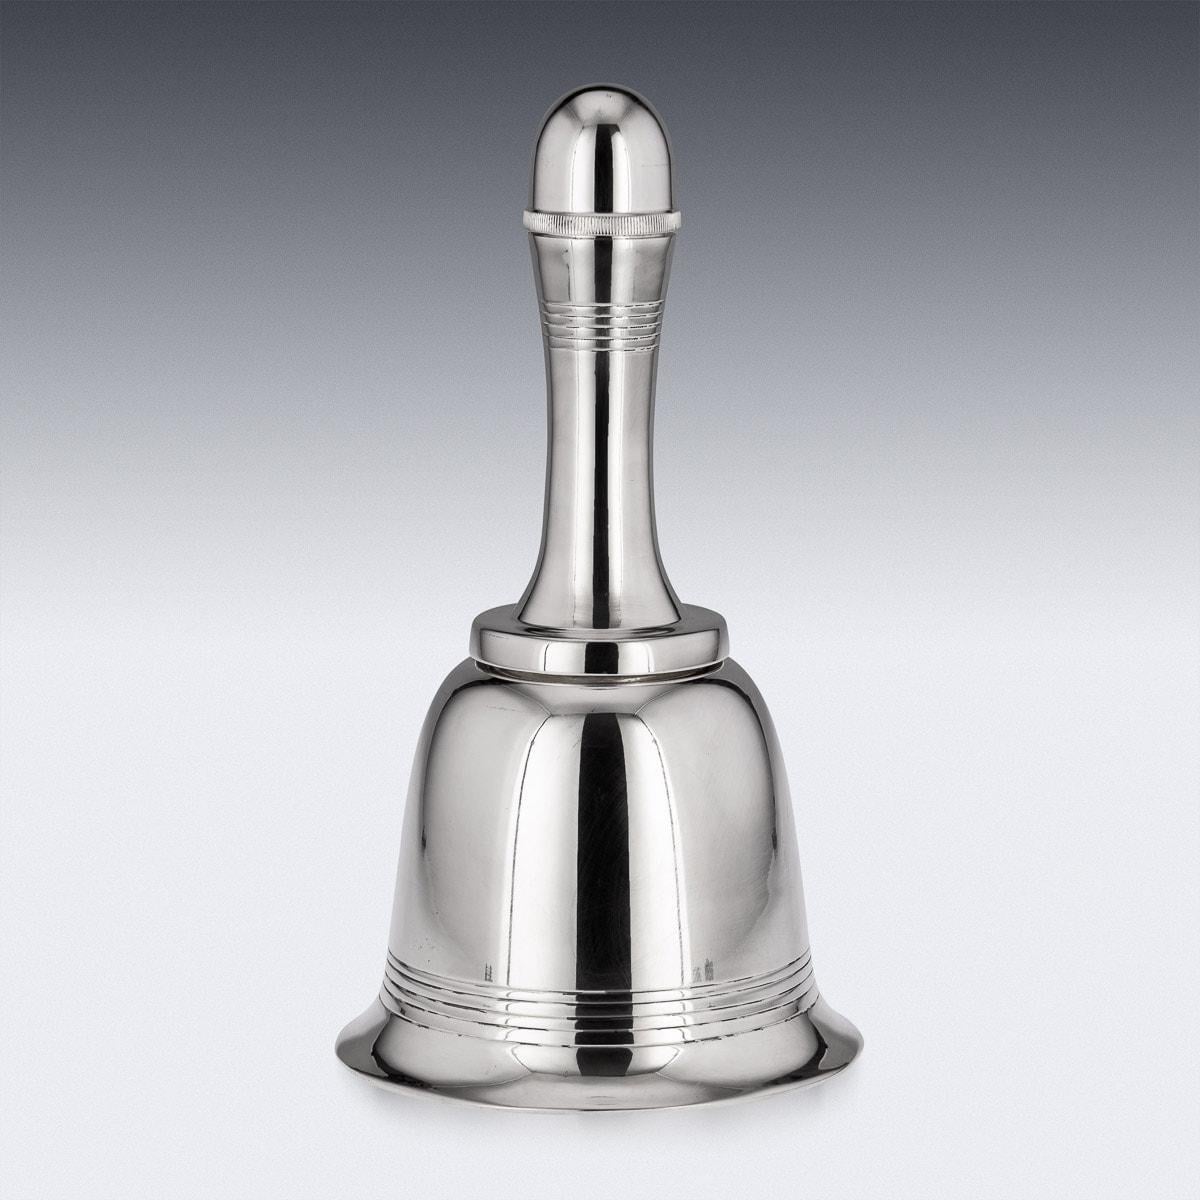 A novelty silver plated bell-form cocktail shaker, stamped below Mappin & Webb, London & Sheffield. It is easy to imagine the appeal behind these objects which would have made wonderful items to wow their guests. As relevant today as it was then, it